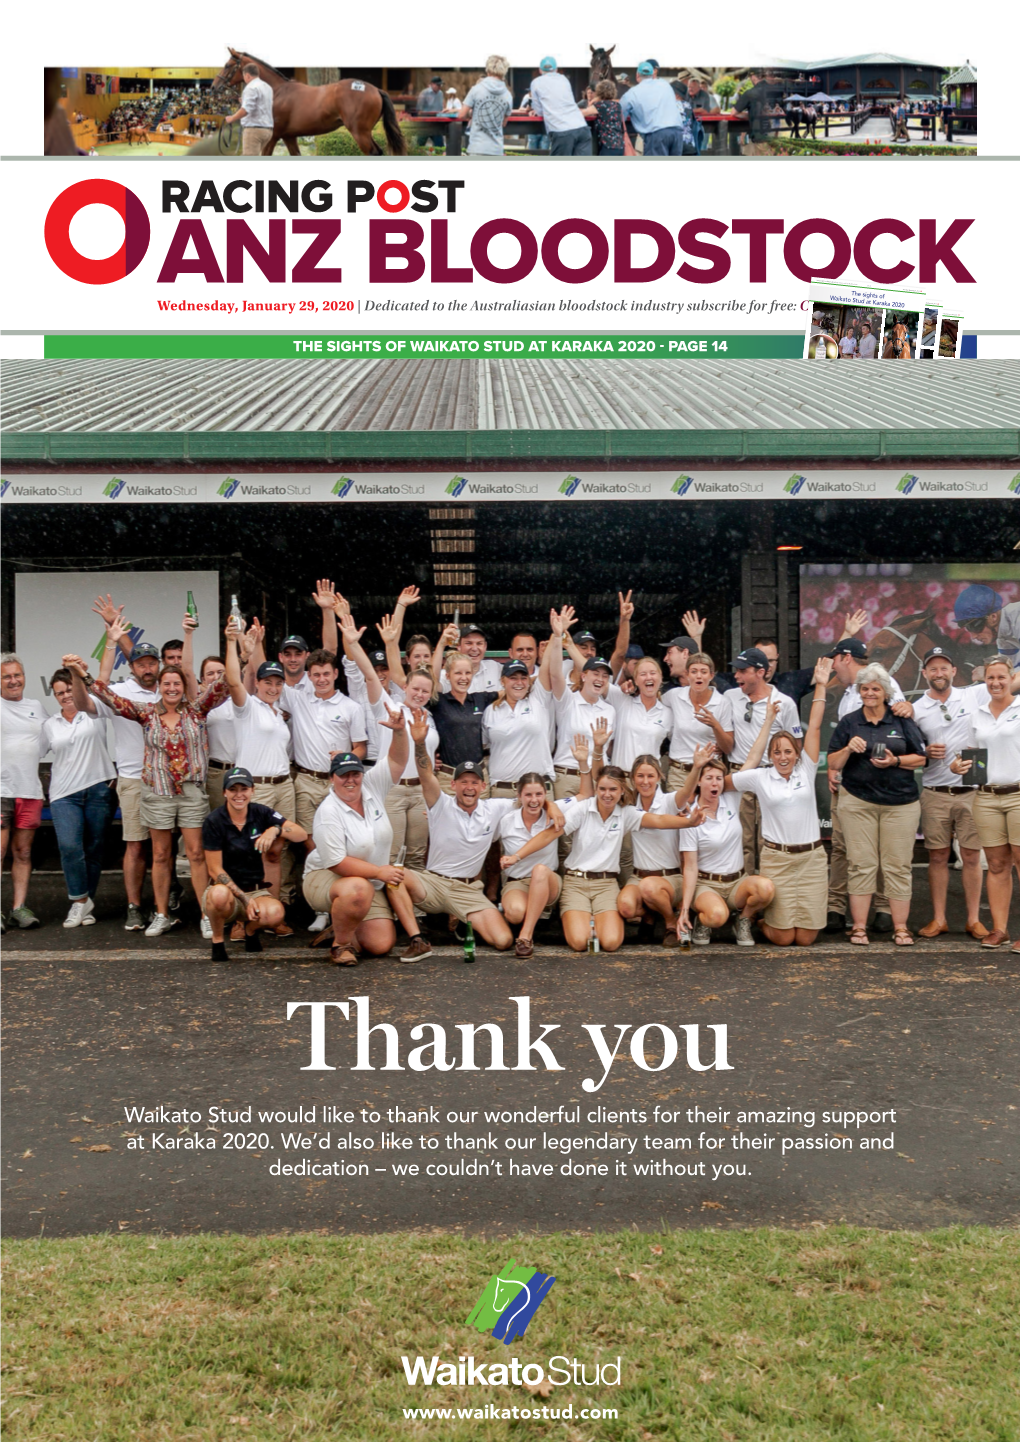 Thank You Waikato Stud Would Like to Thank Our Wonderful Clients for Their Amazing Support at Karaka 2020